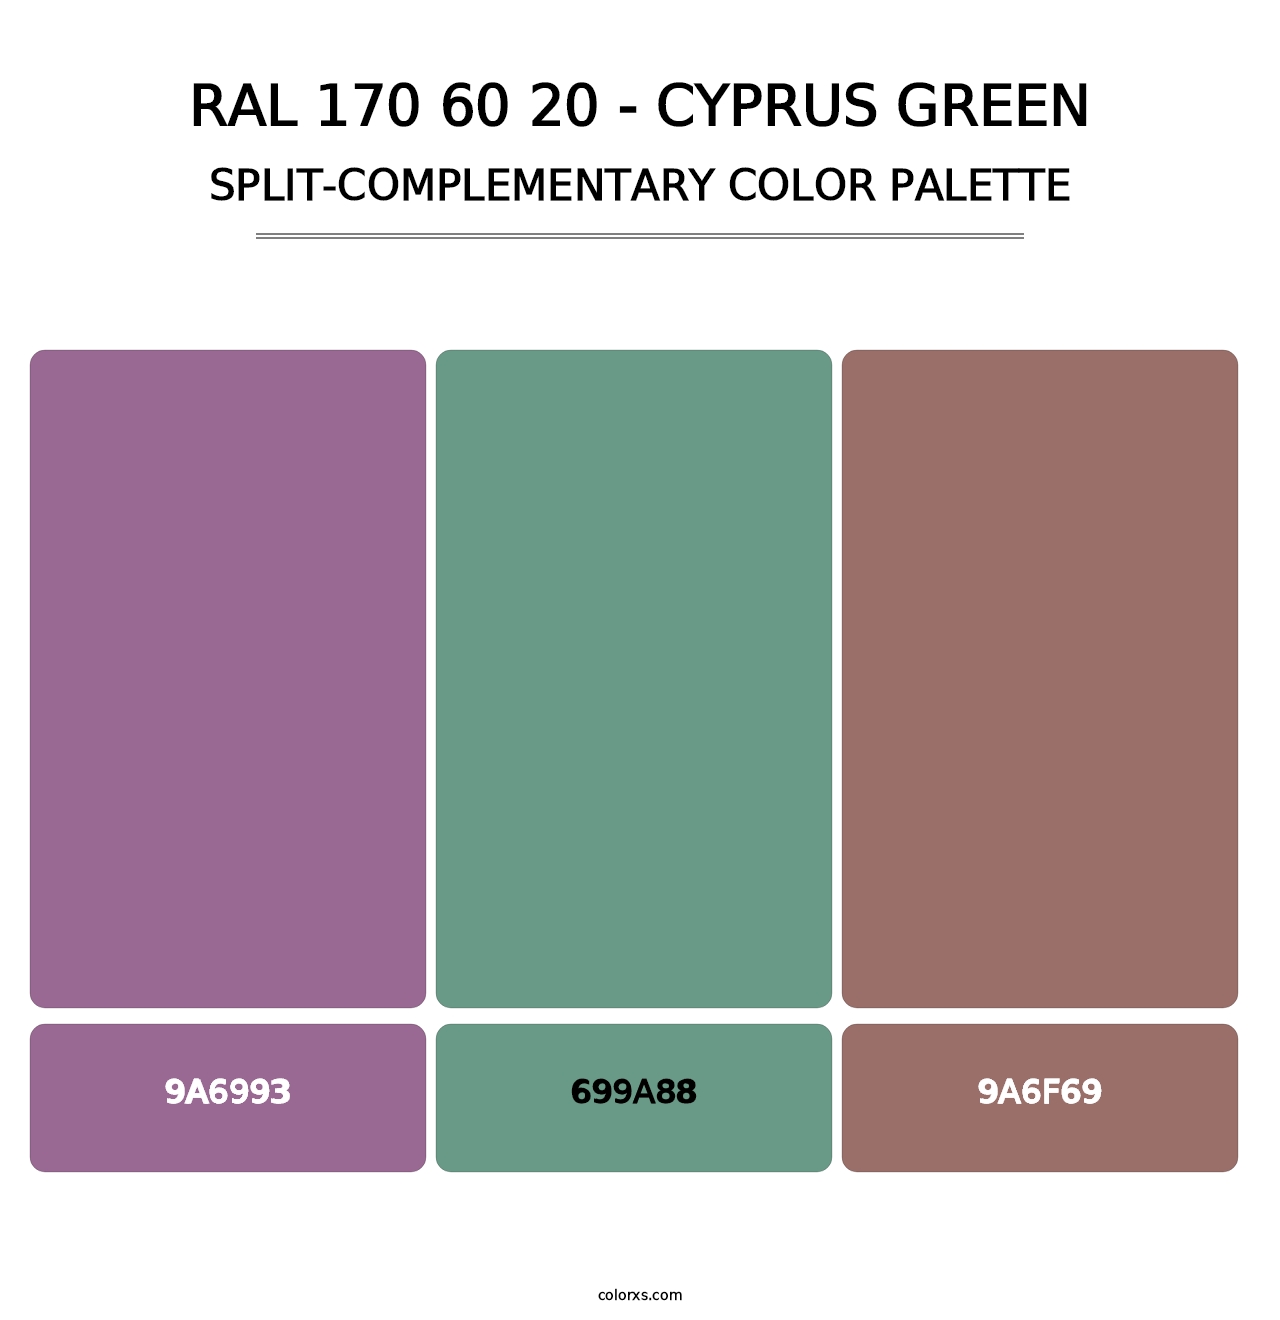 RAL 170 60 20 - Cyprus Green - Split-Complementary Color Palette